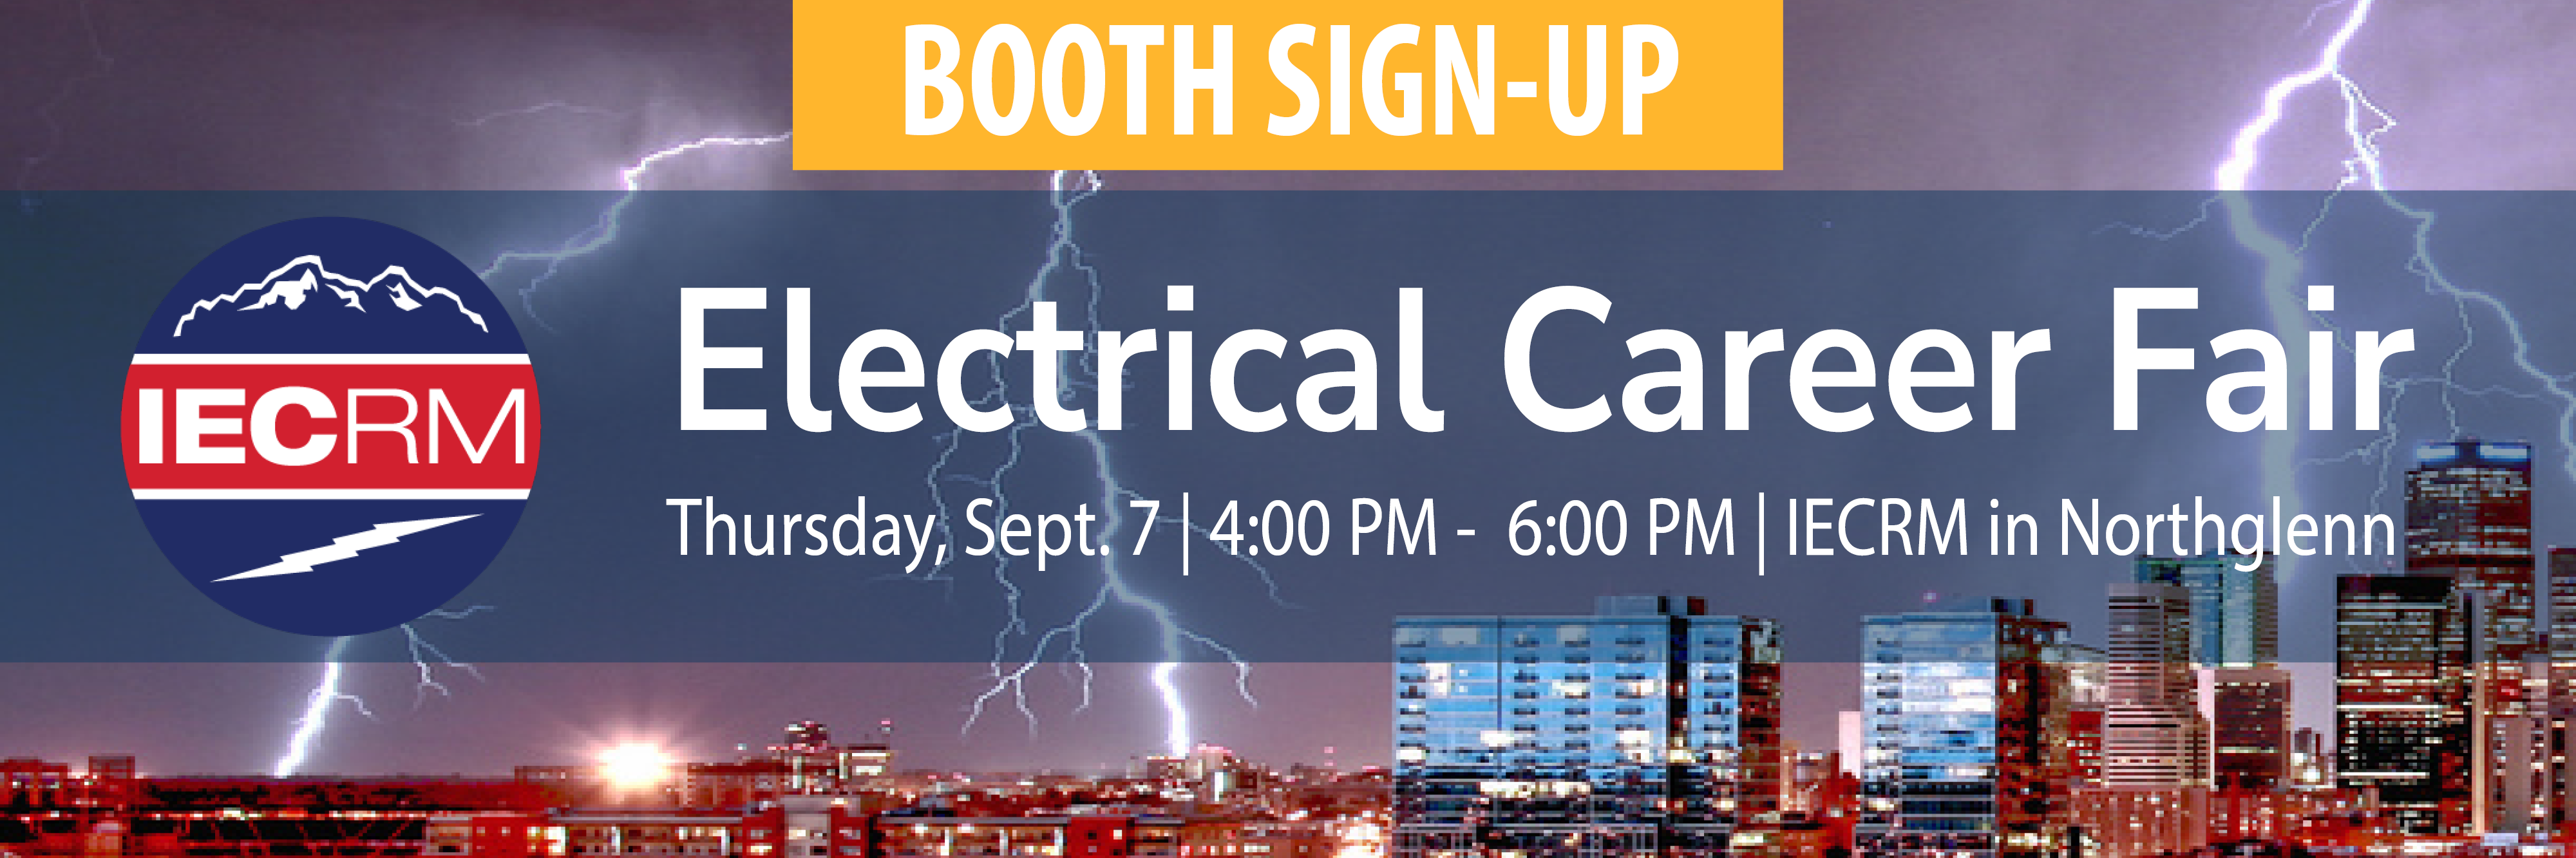 Booth Sign-Up: Electrical Career Fair